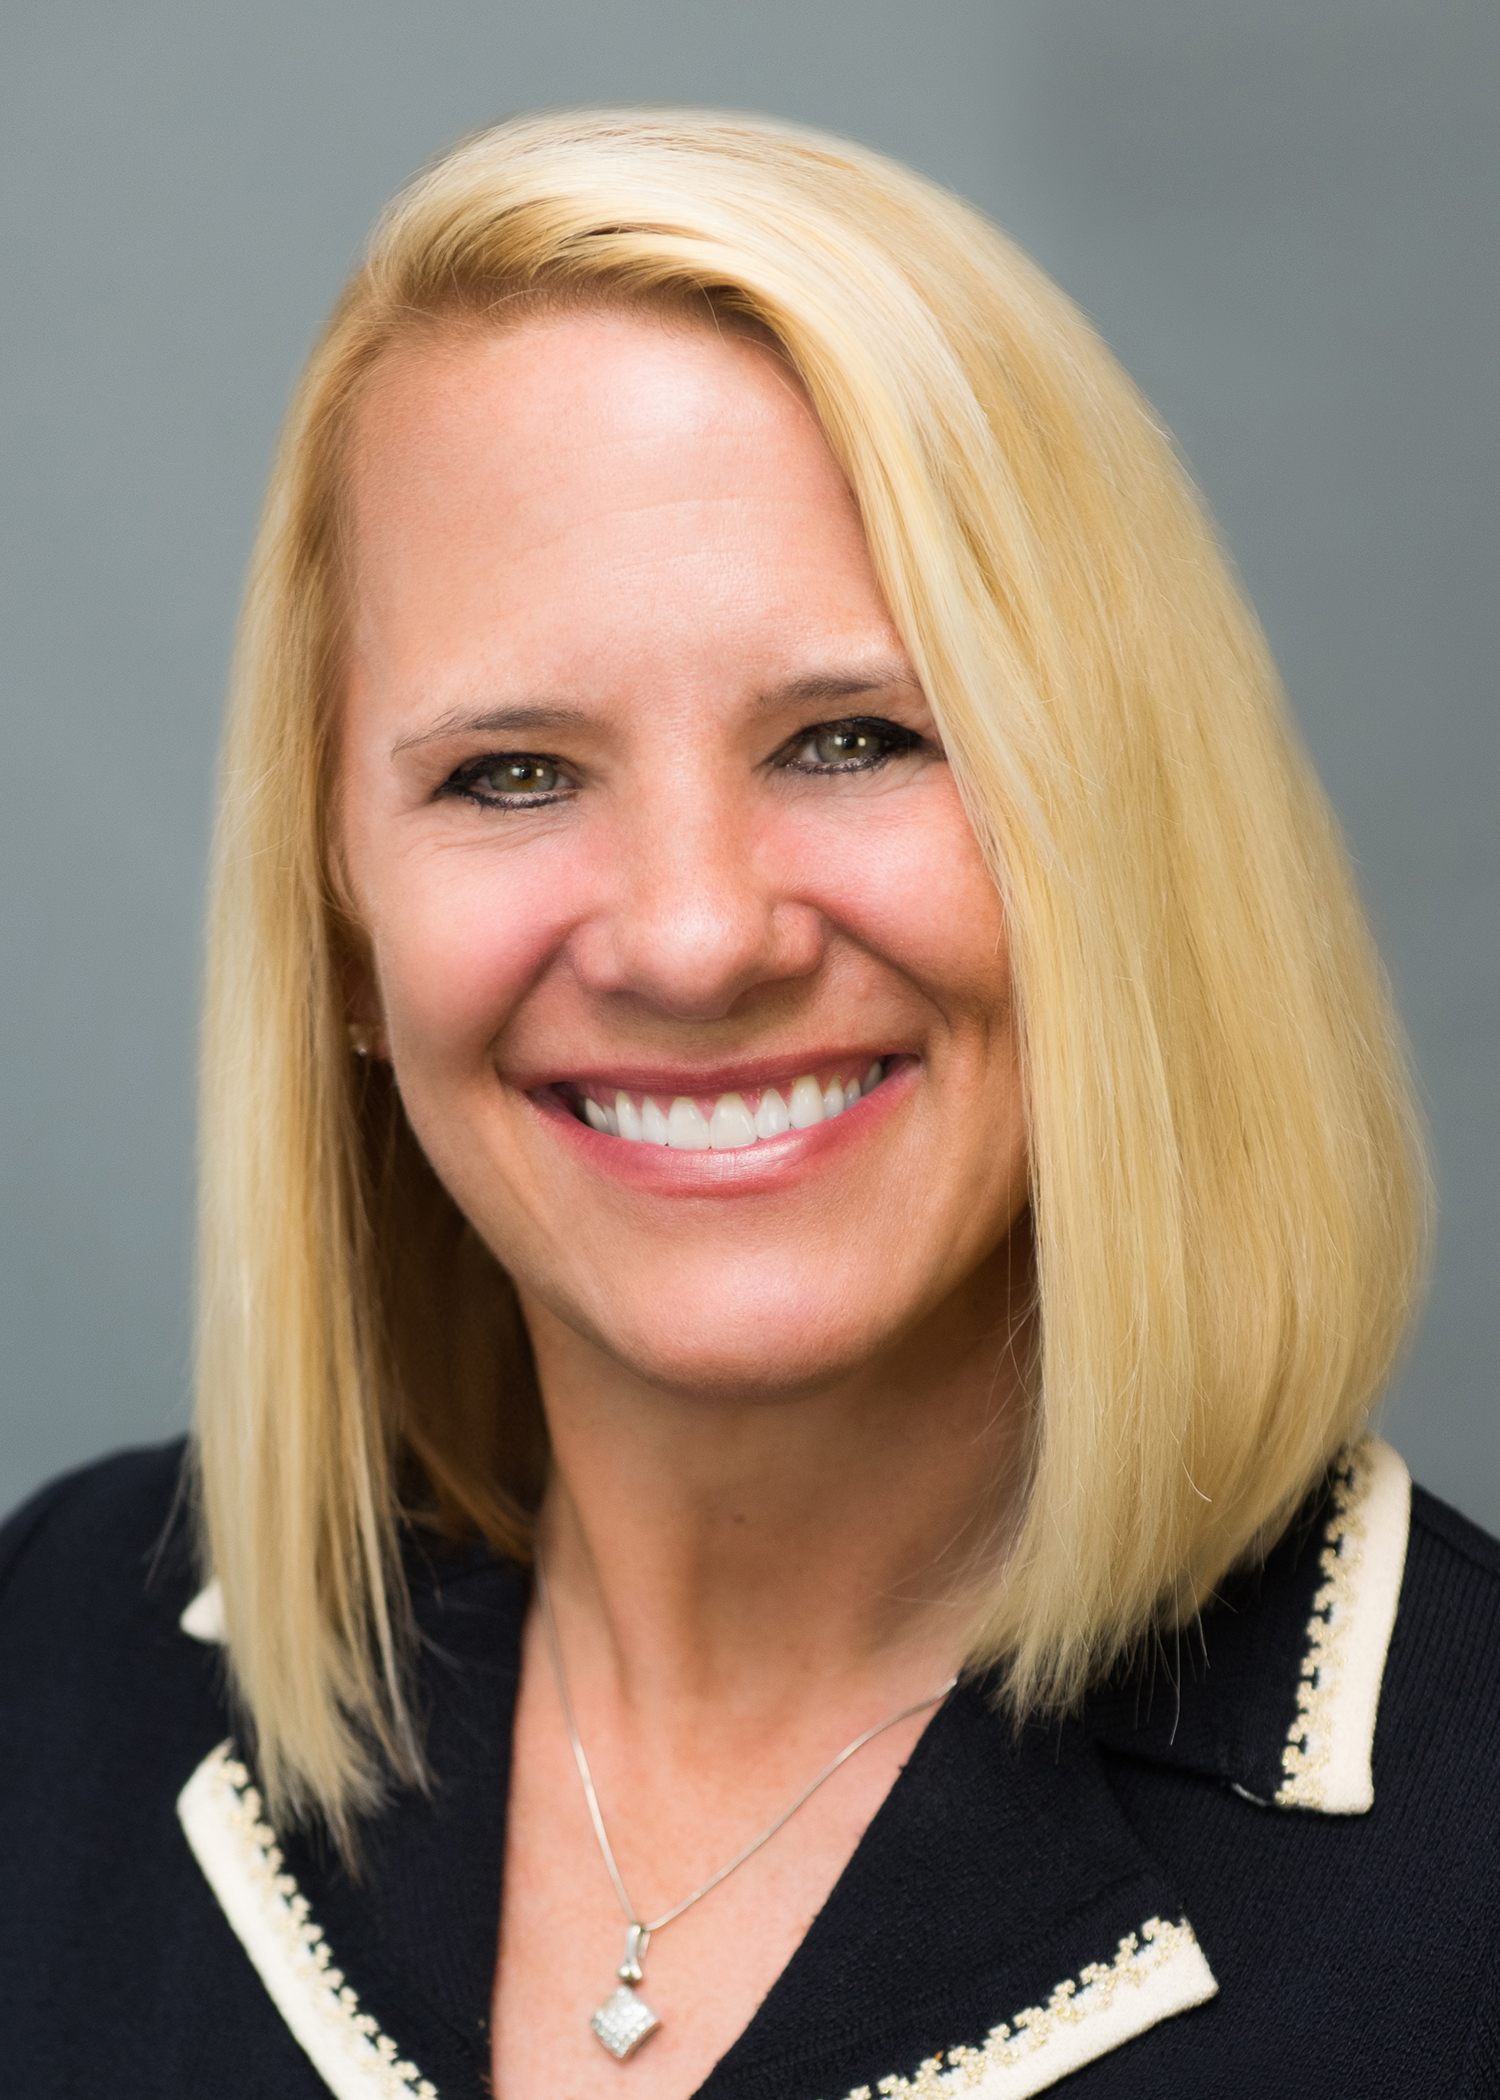 Wilmington Trust hired Tracy Nickl as national head of Client Development and Engagement for Wealth Advisory.